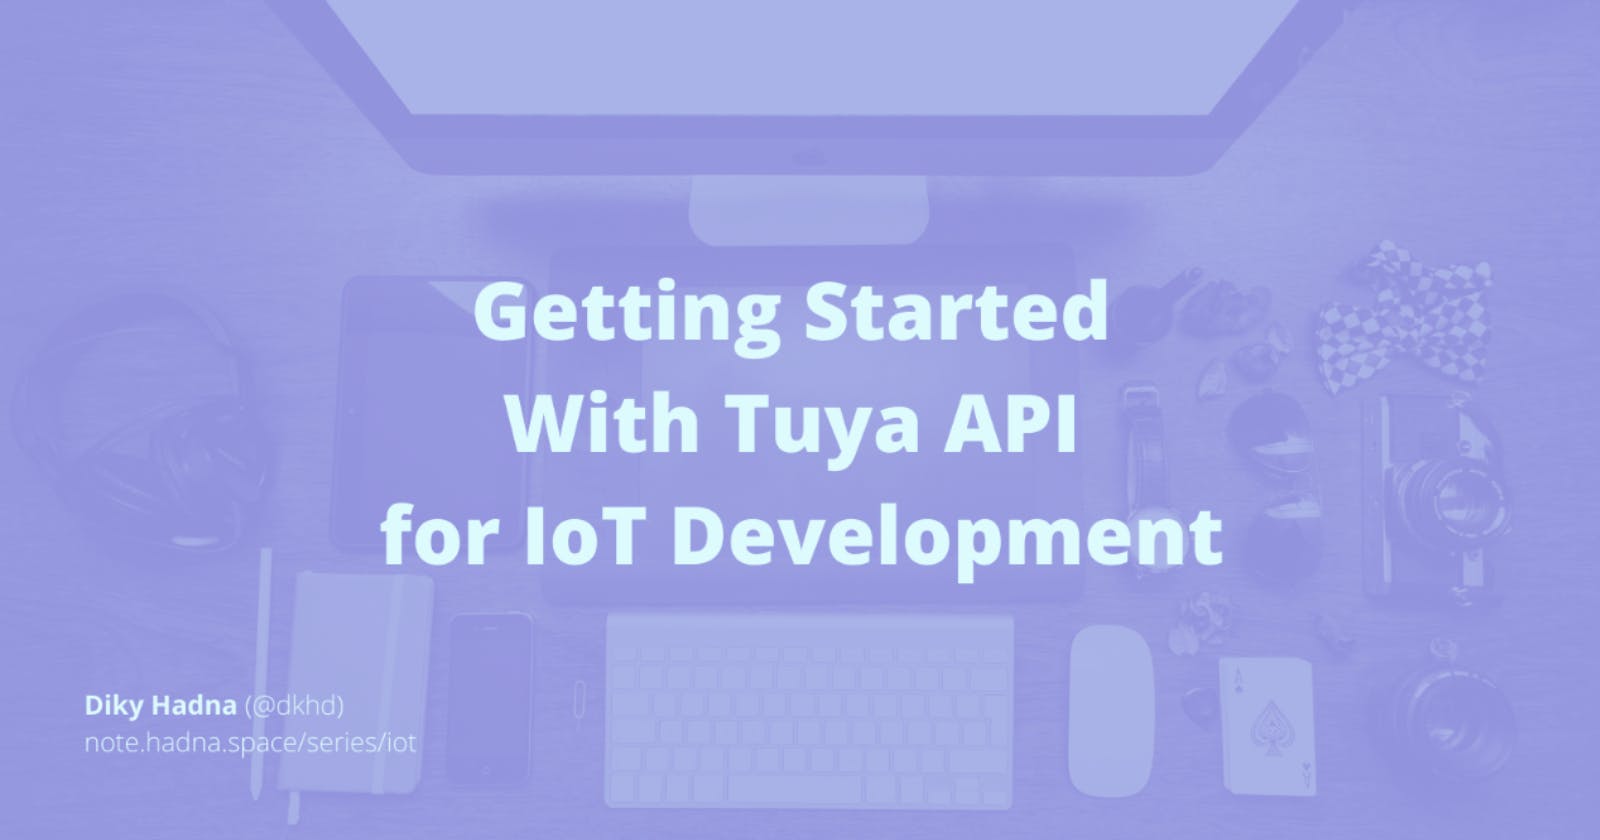 Getting Started With Tuya API for IoT Development